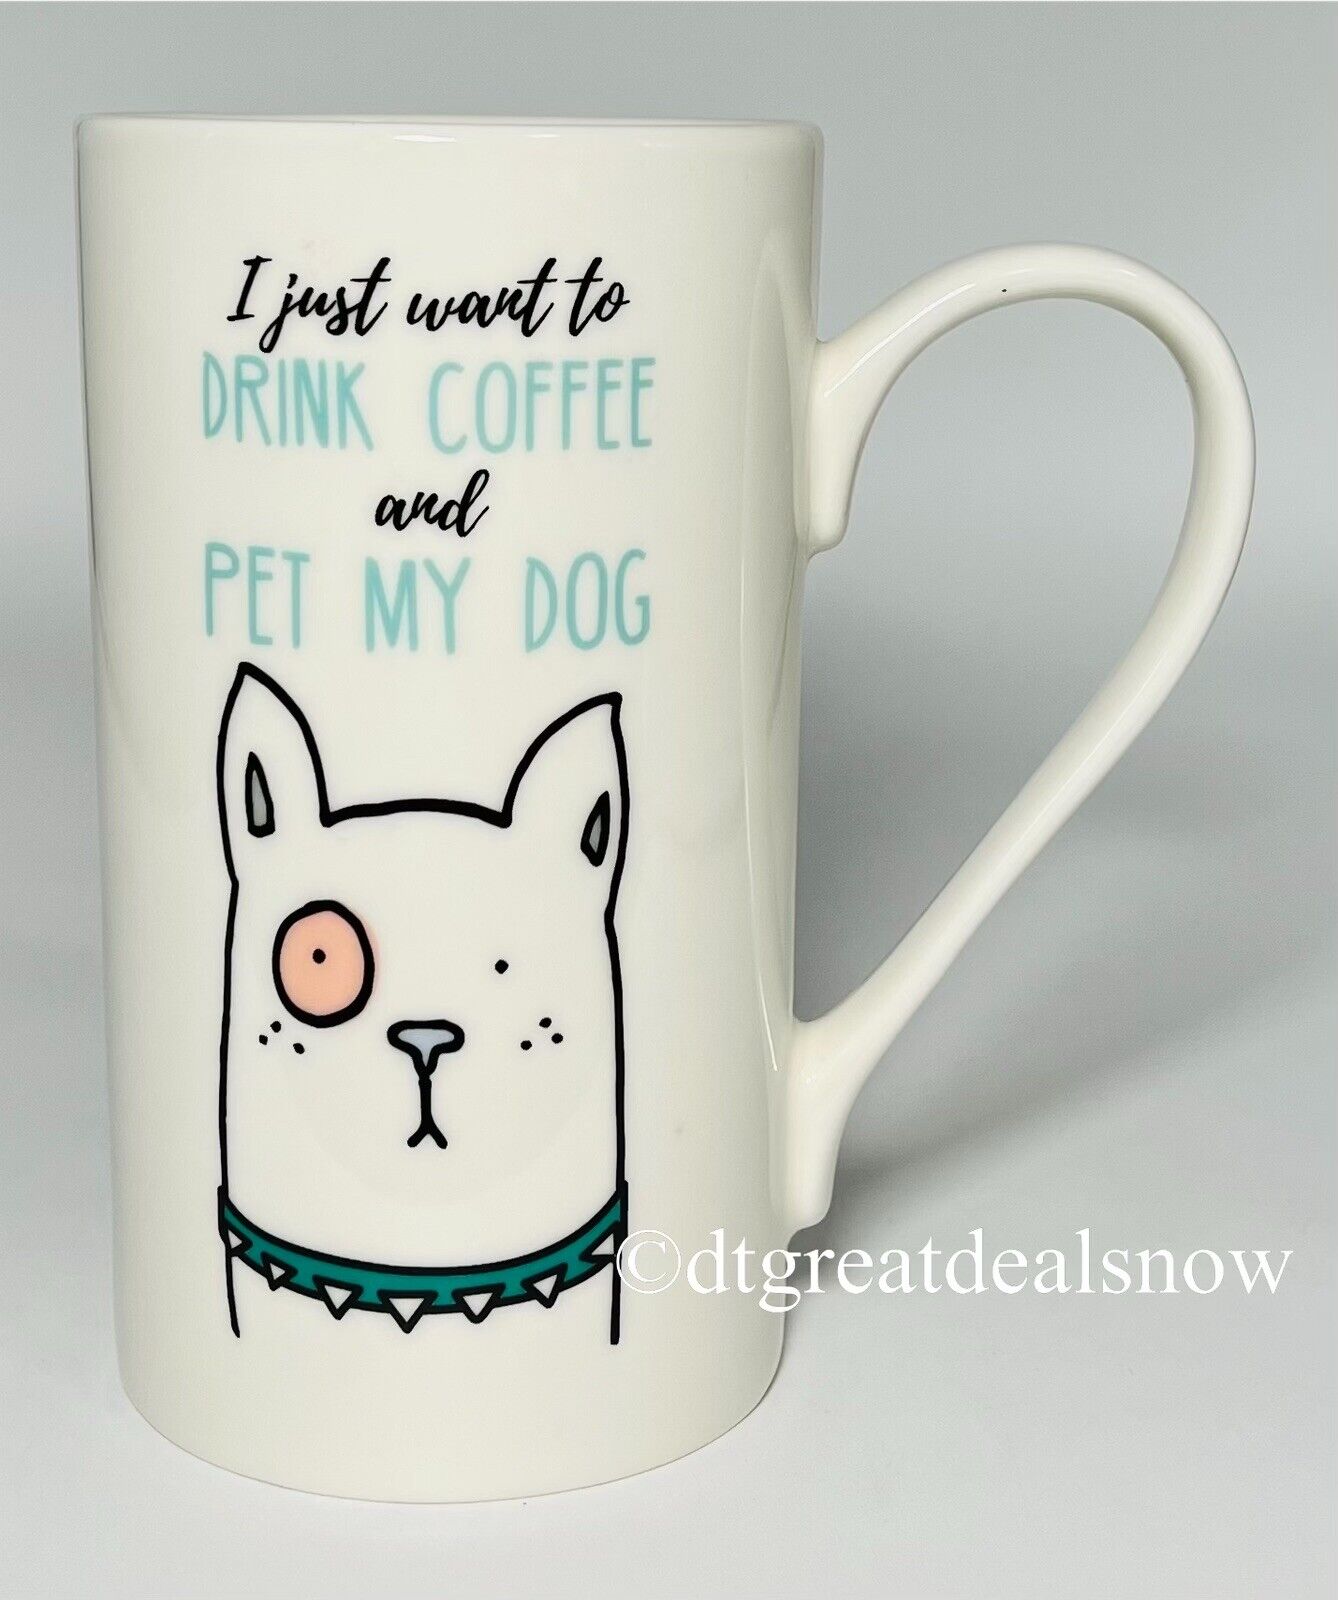 Clay Art Tall Coffee Mug I just want to DRINK COFFEE and PET MY DOG 20oz White